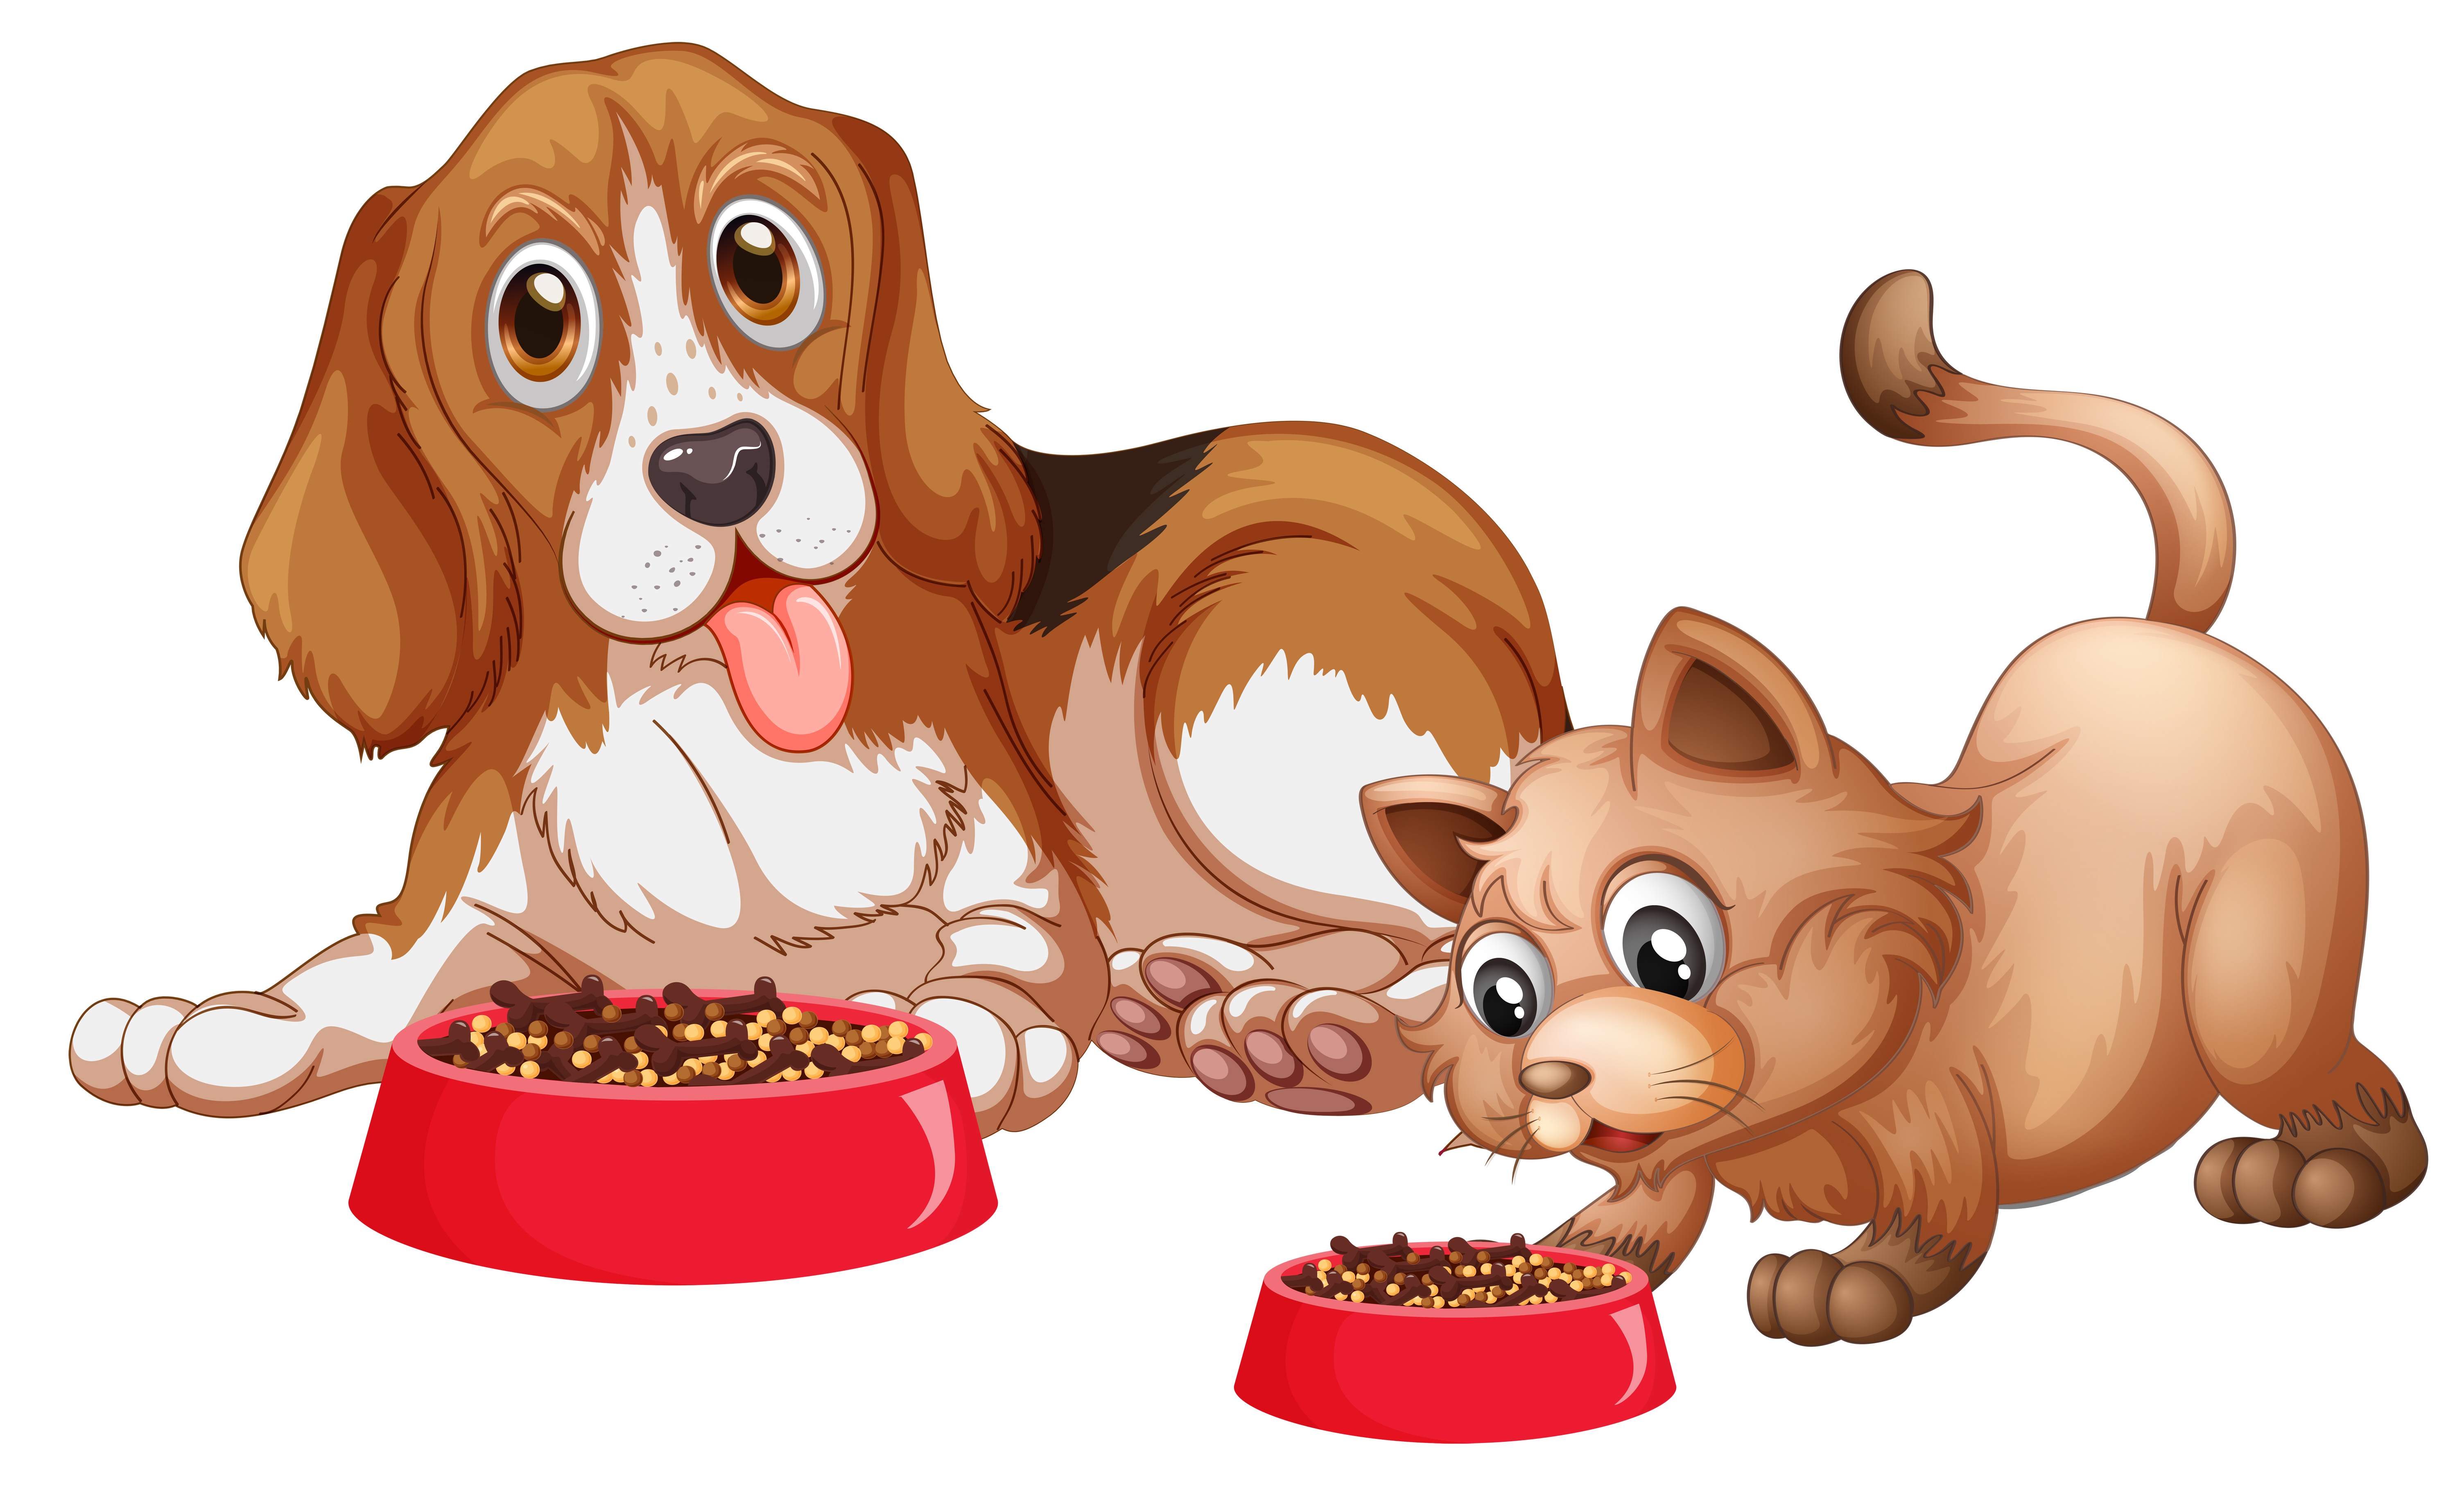  Dog  and cat  eating 373727 Download Free Vectors Clipart  